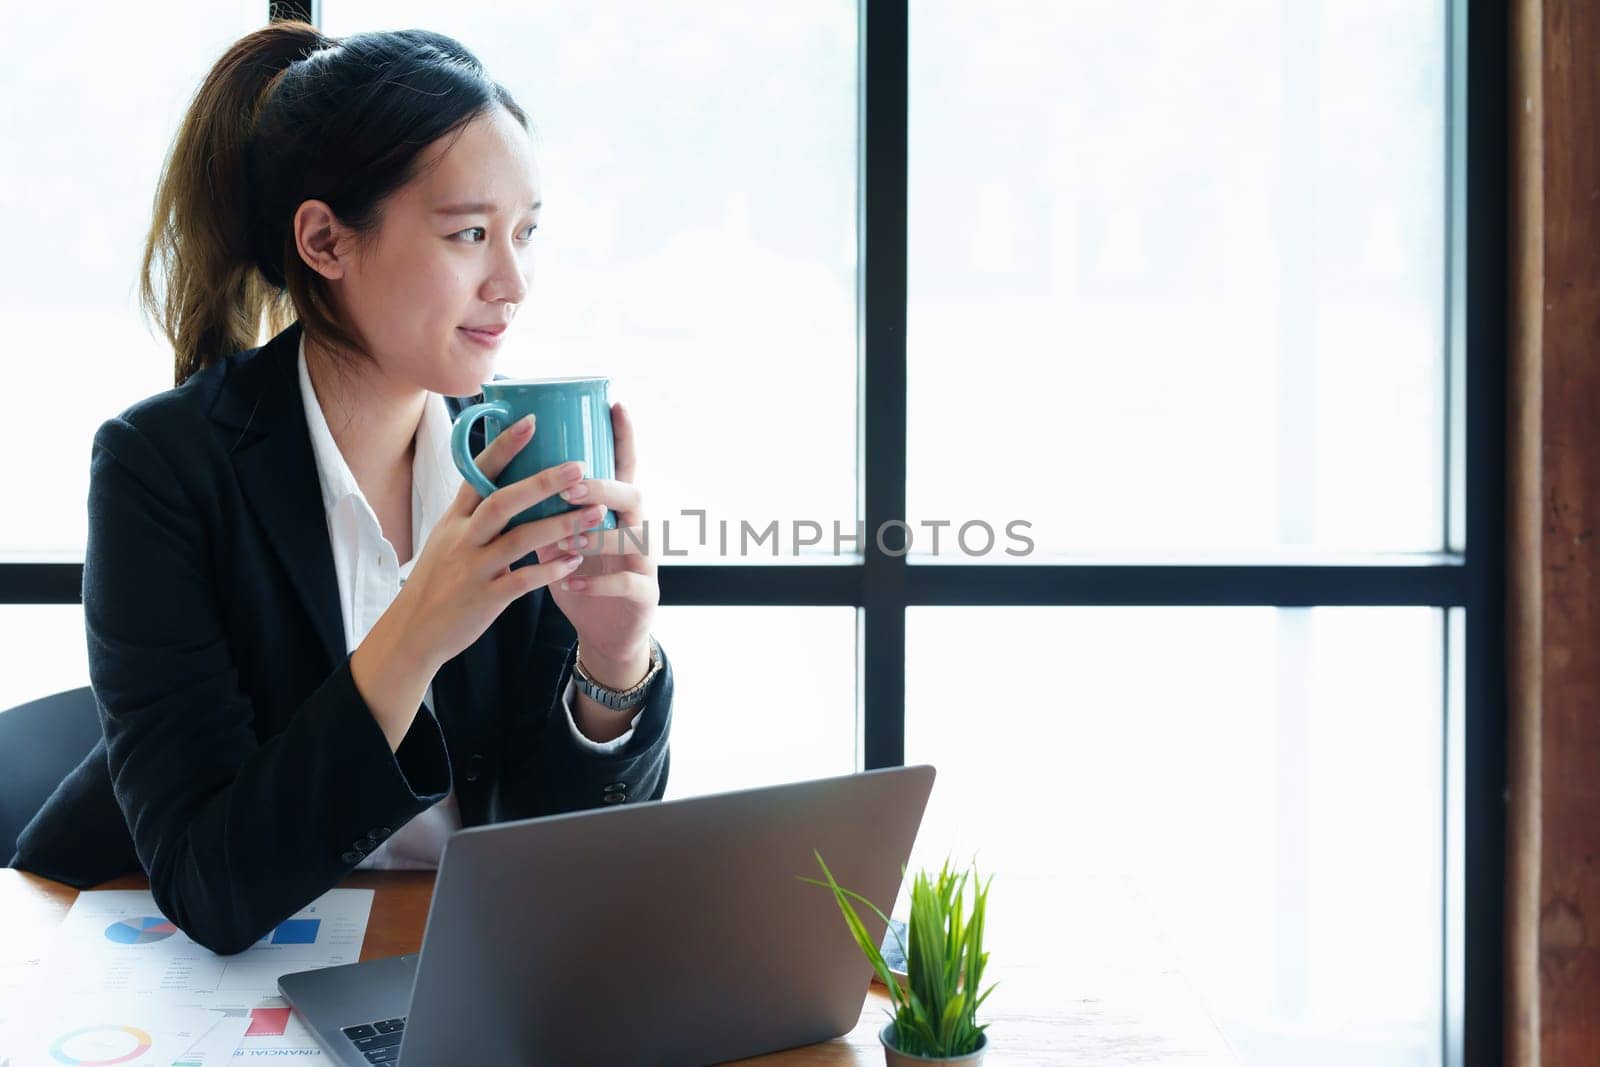 Portrait of a young woman drinking coffee while using a computer.